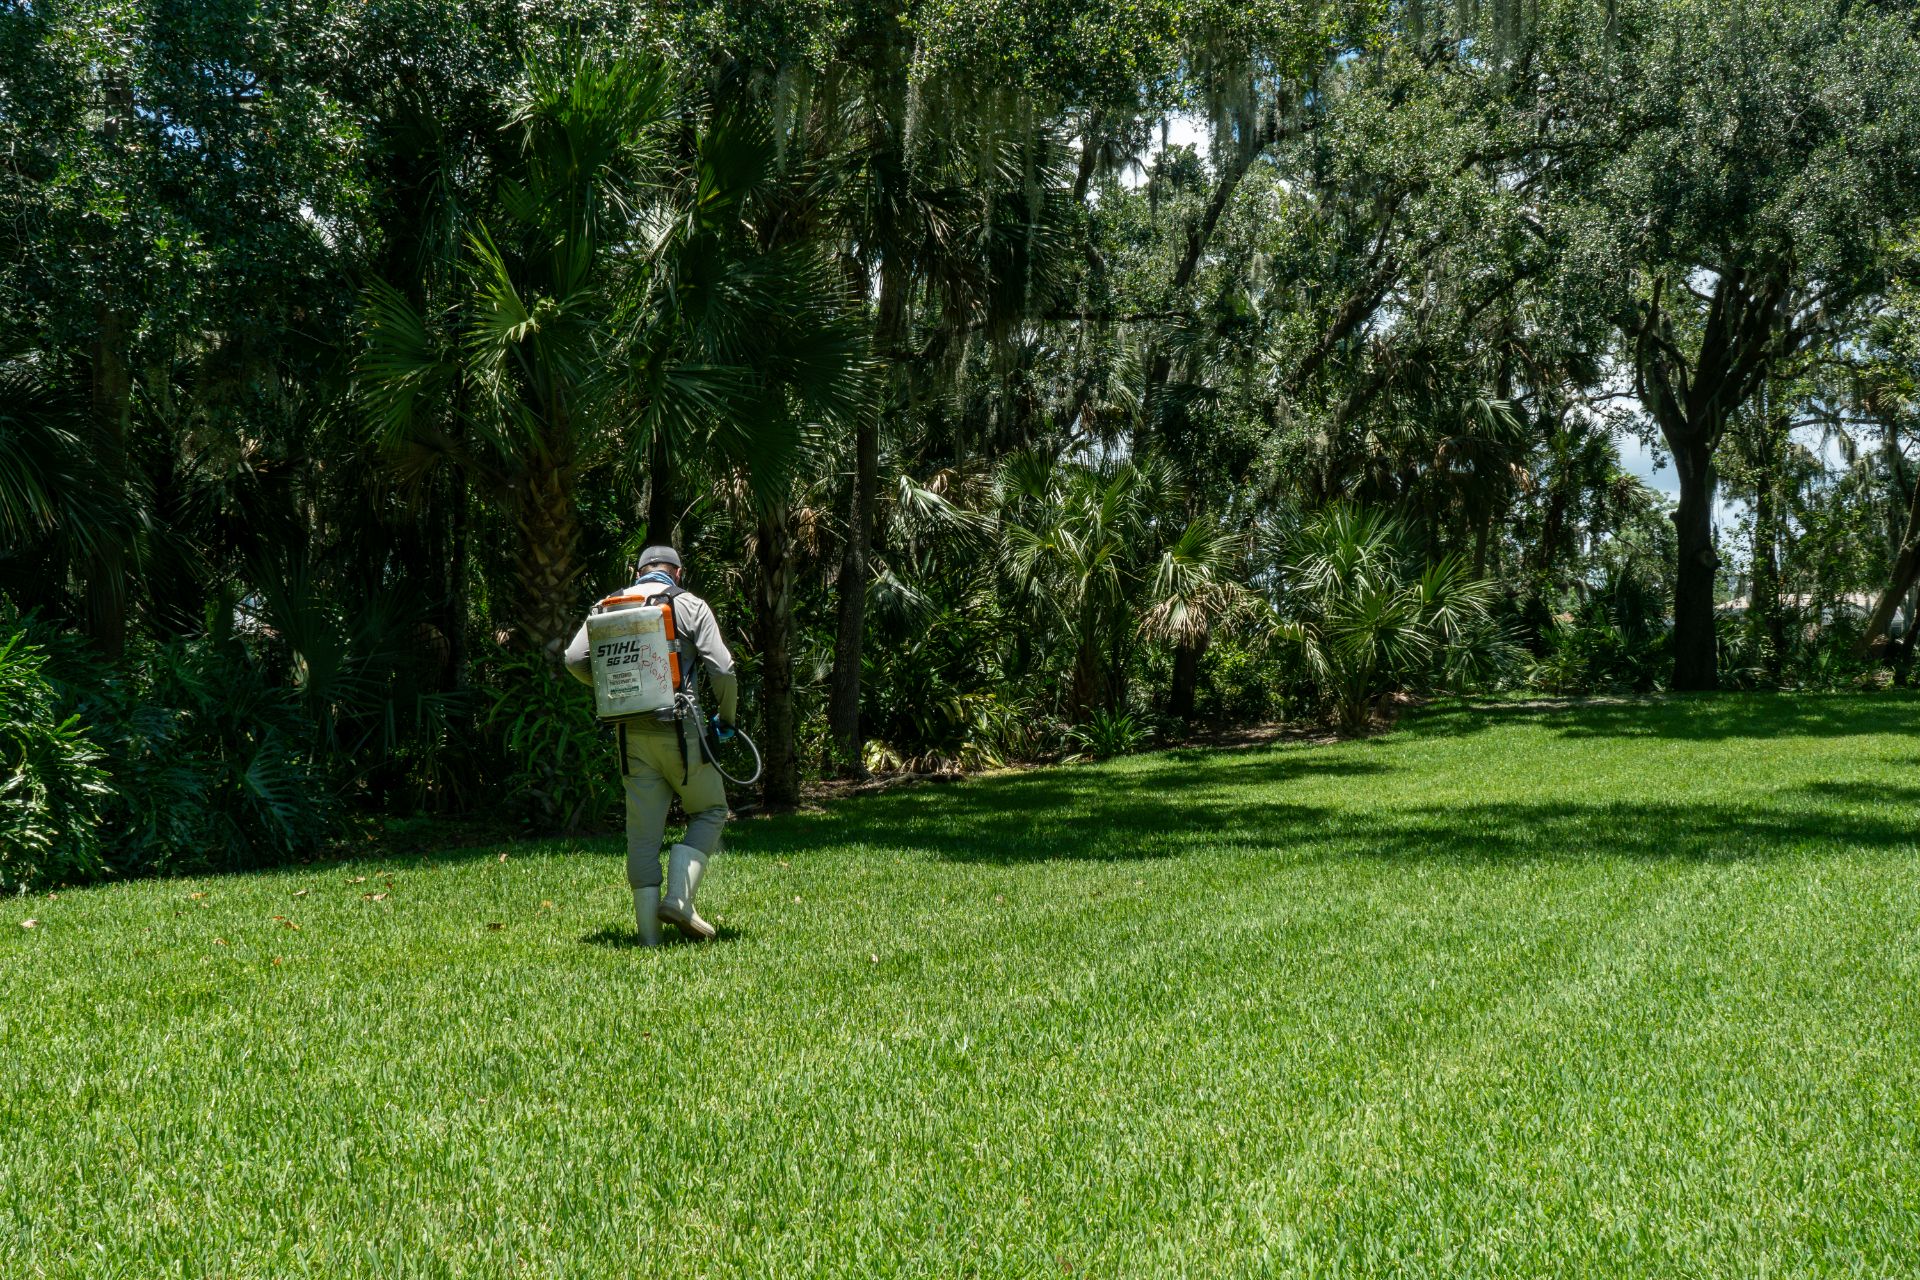 A GreenEdge staff member skillfully spraying a lawn in Sarasota. Our team uses effective techniques to control pests, weeds, or enhance the health of the grass. Trust GreenEdge for professional lawn spraying services that result in a lush and vibrant lawn.